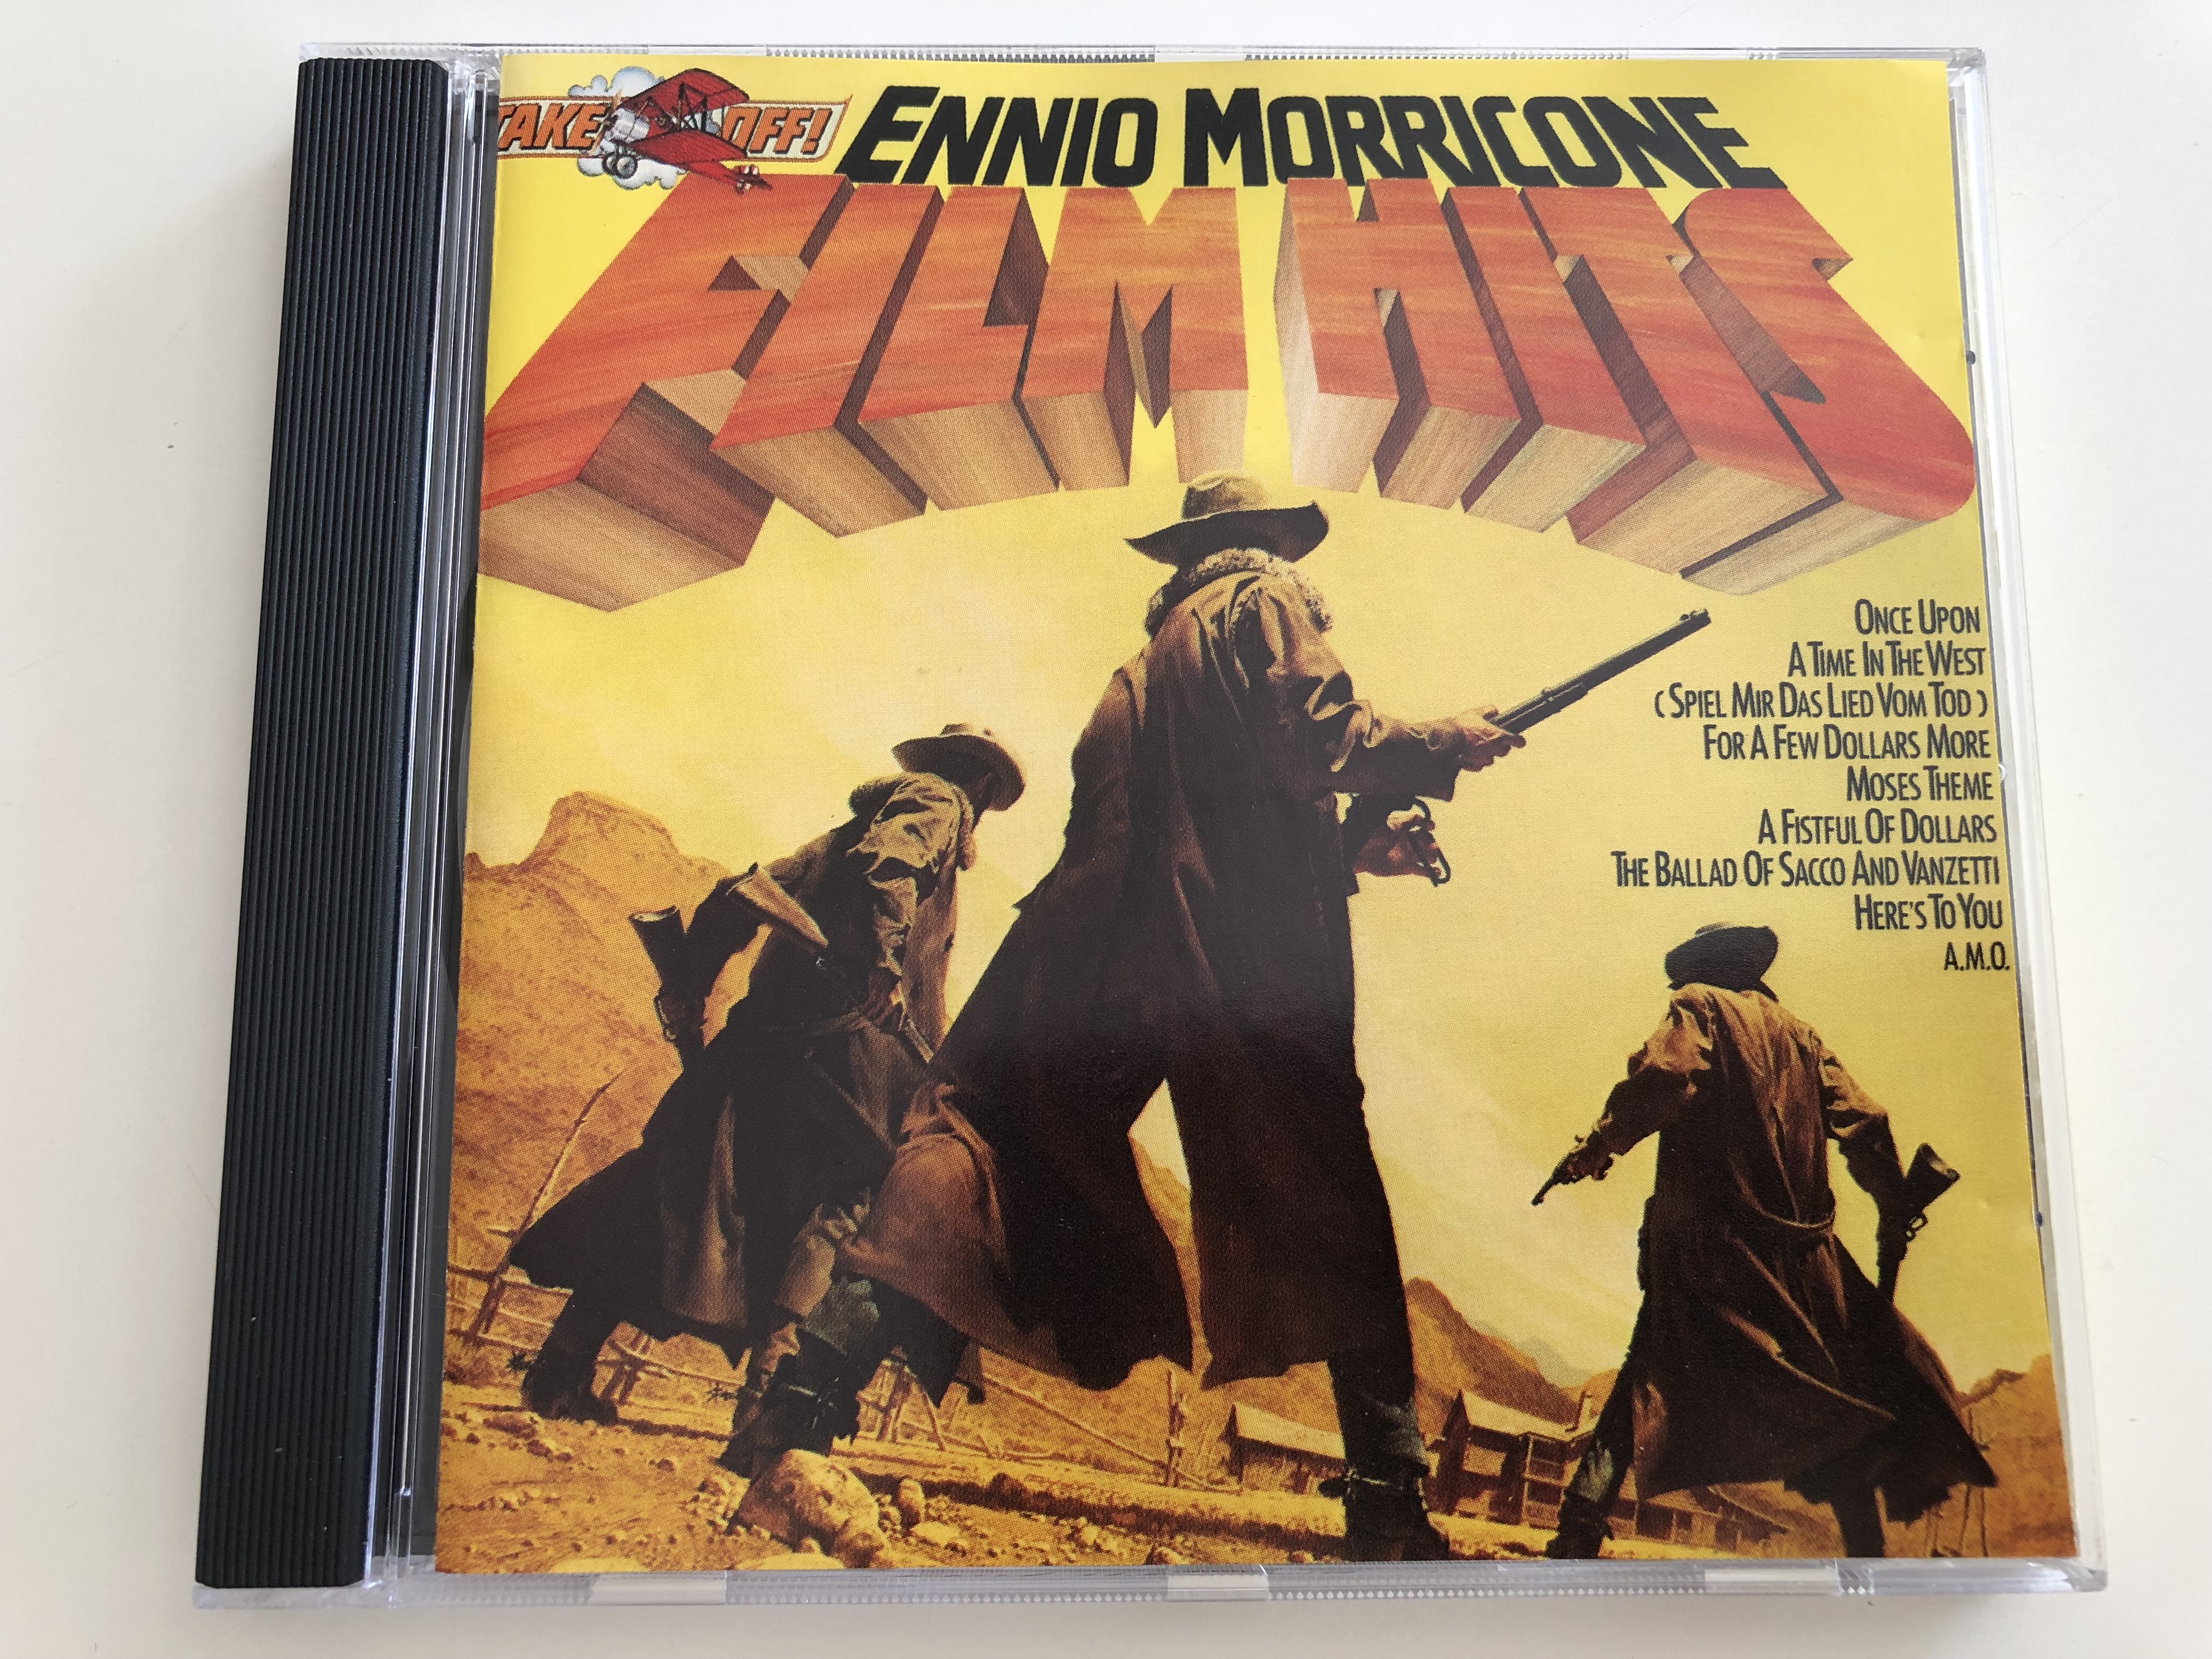 ennio-morricone-film-hits-once-upon-a-time-in-the-west-for-a-few-dollars-more-moses-theme-the-ballad-of-sacco-and-vanzetti-audio-cd-1989-bmg-nd-70091-1-.jpg